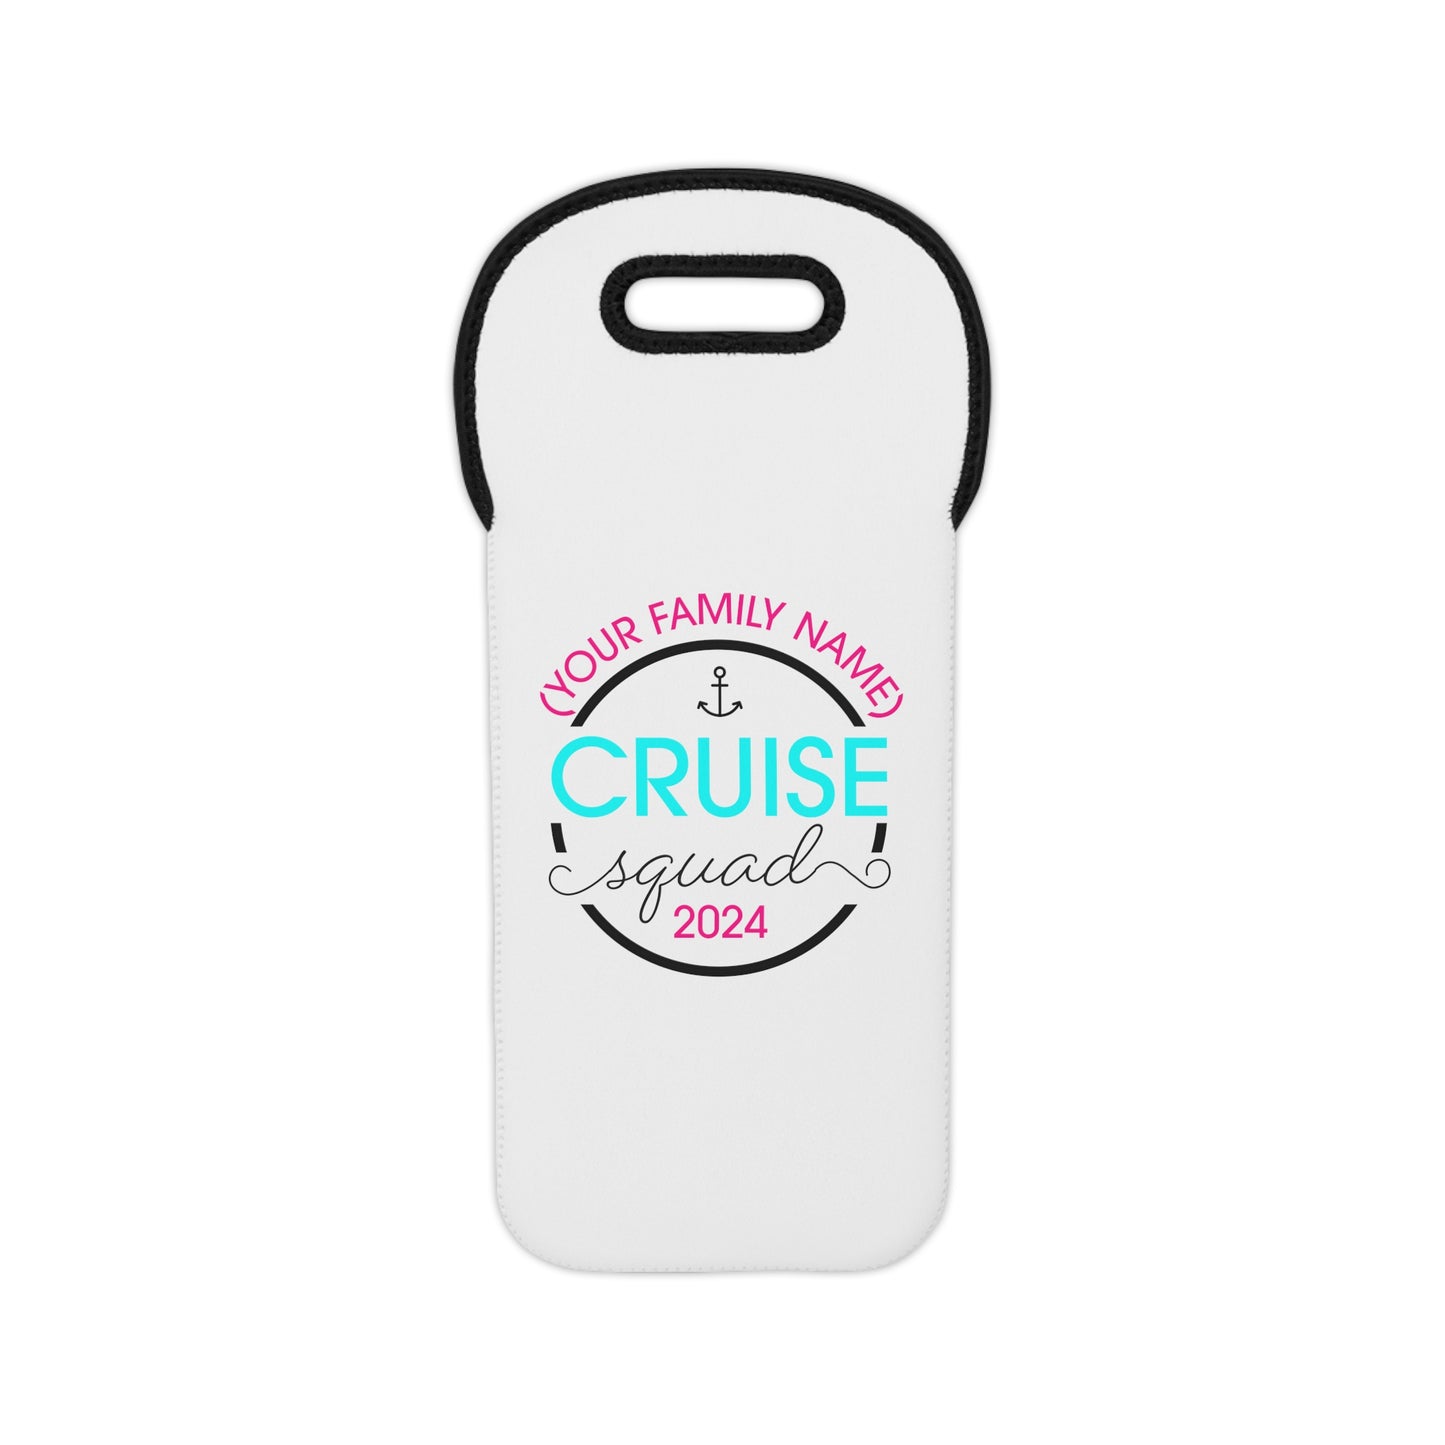 Cruise Squad 2024 (Your Family Name)–Wine Tote Bag